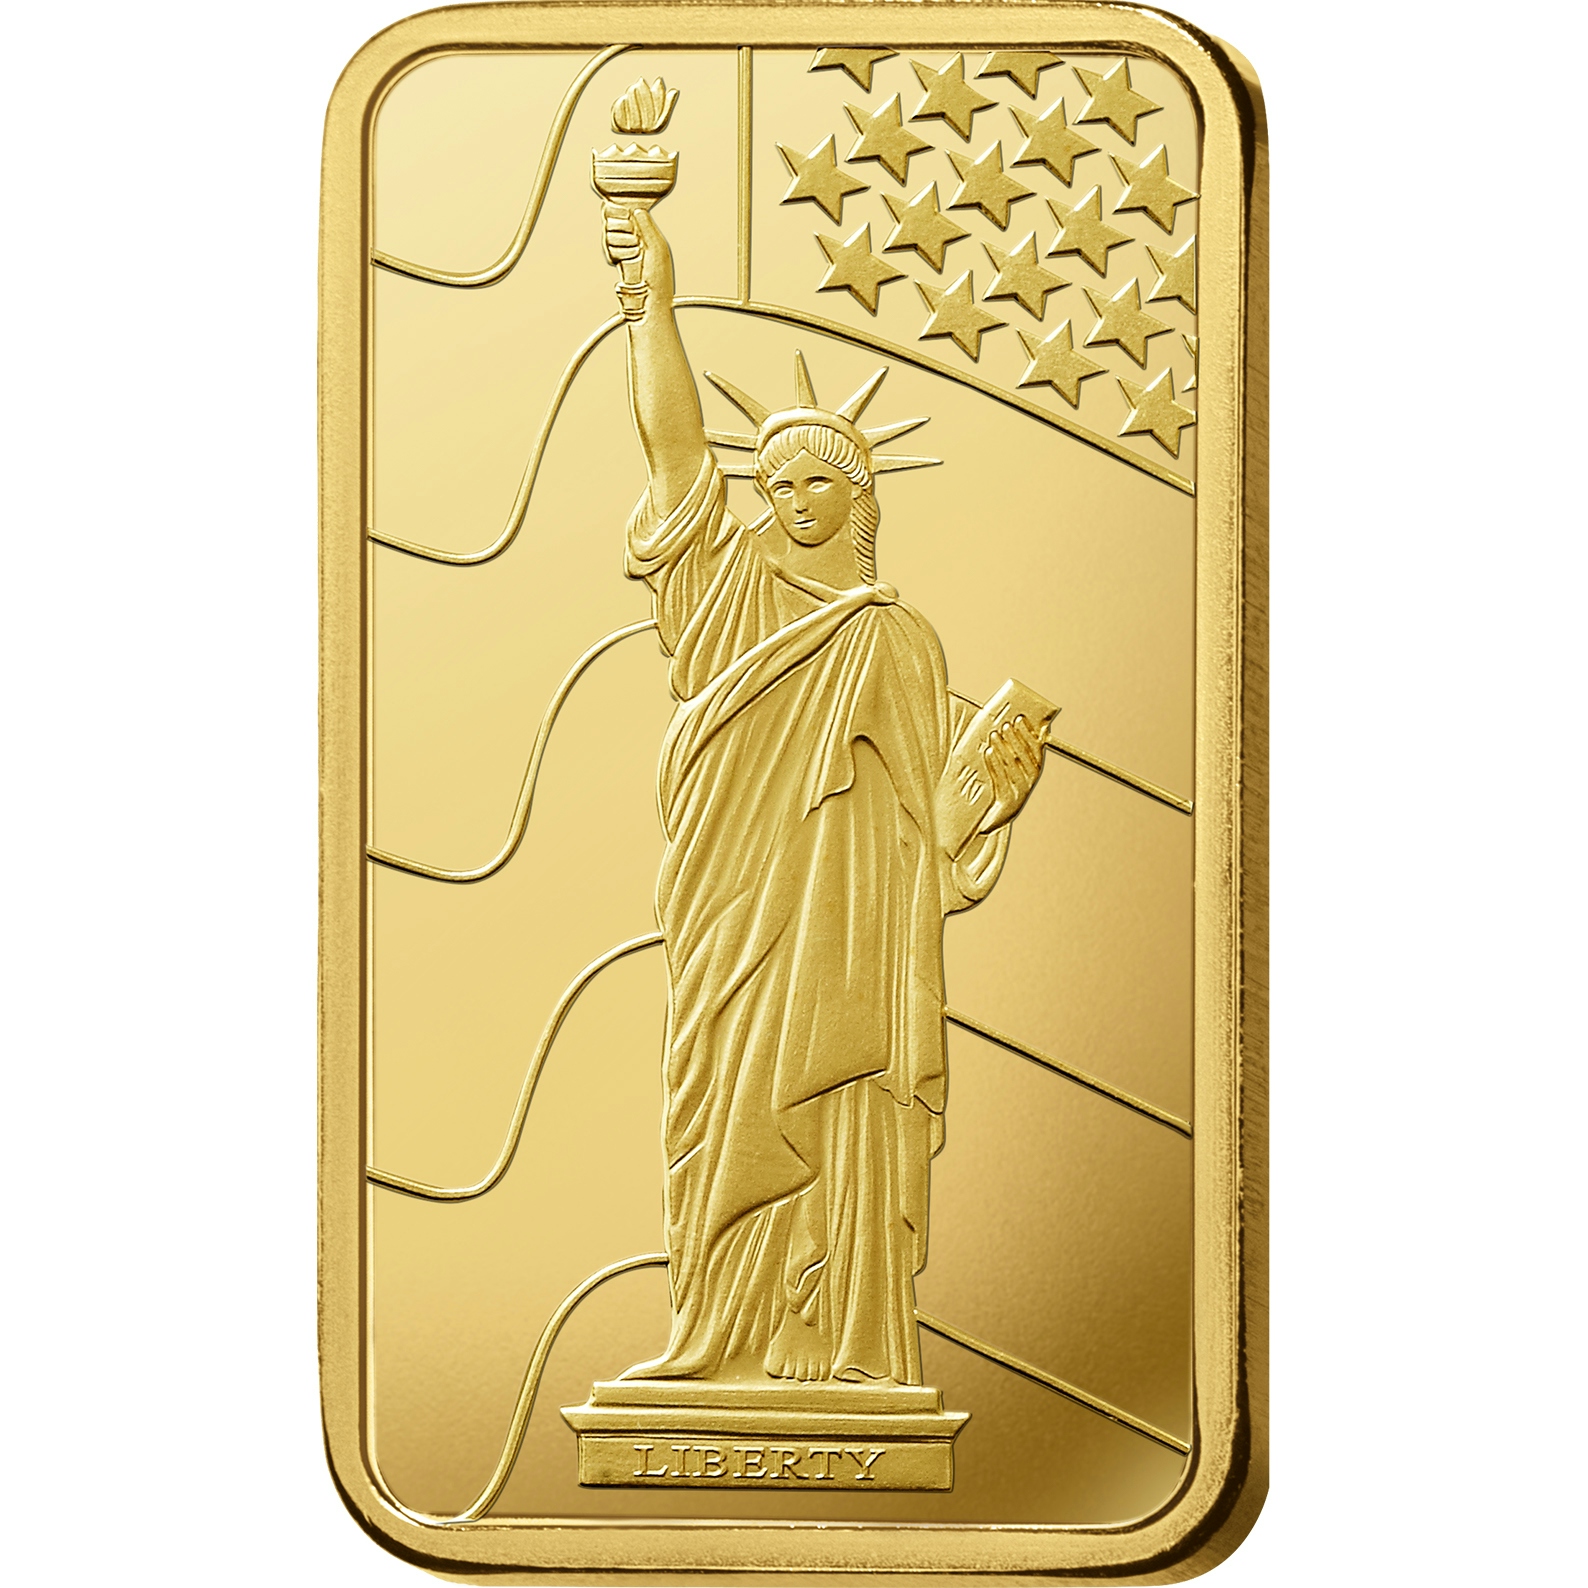 Achat d'or, 2.5 gram d'or pur Liberty - PAMP Suisse - Front 